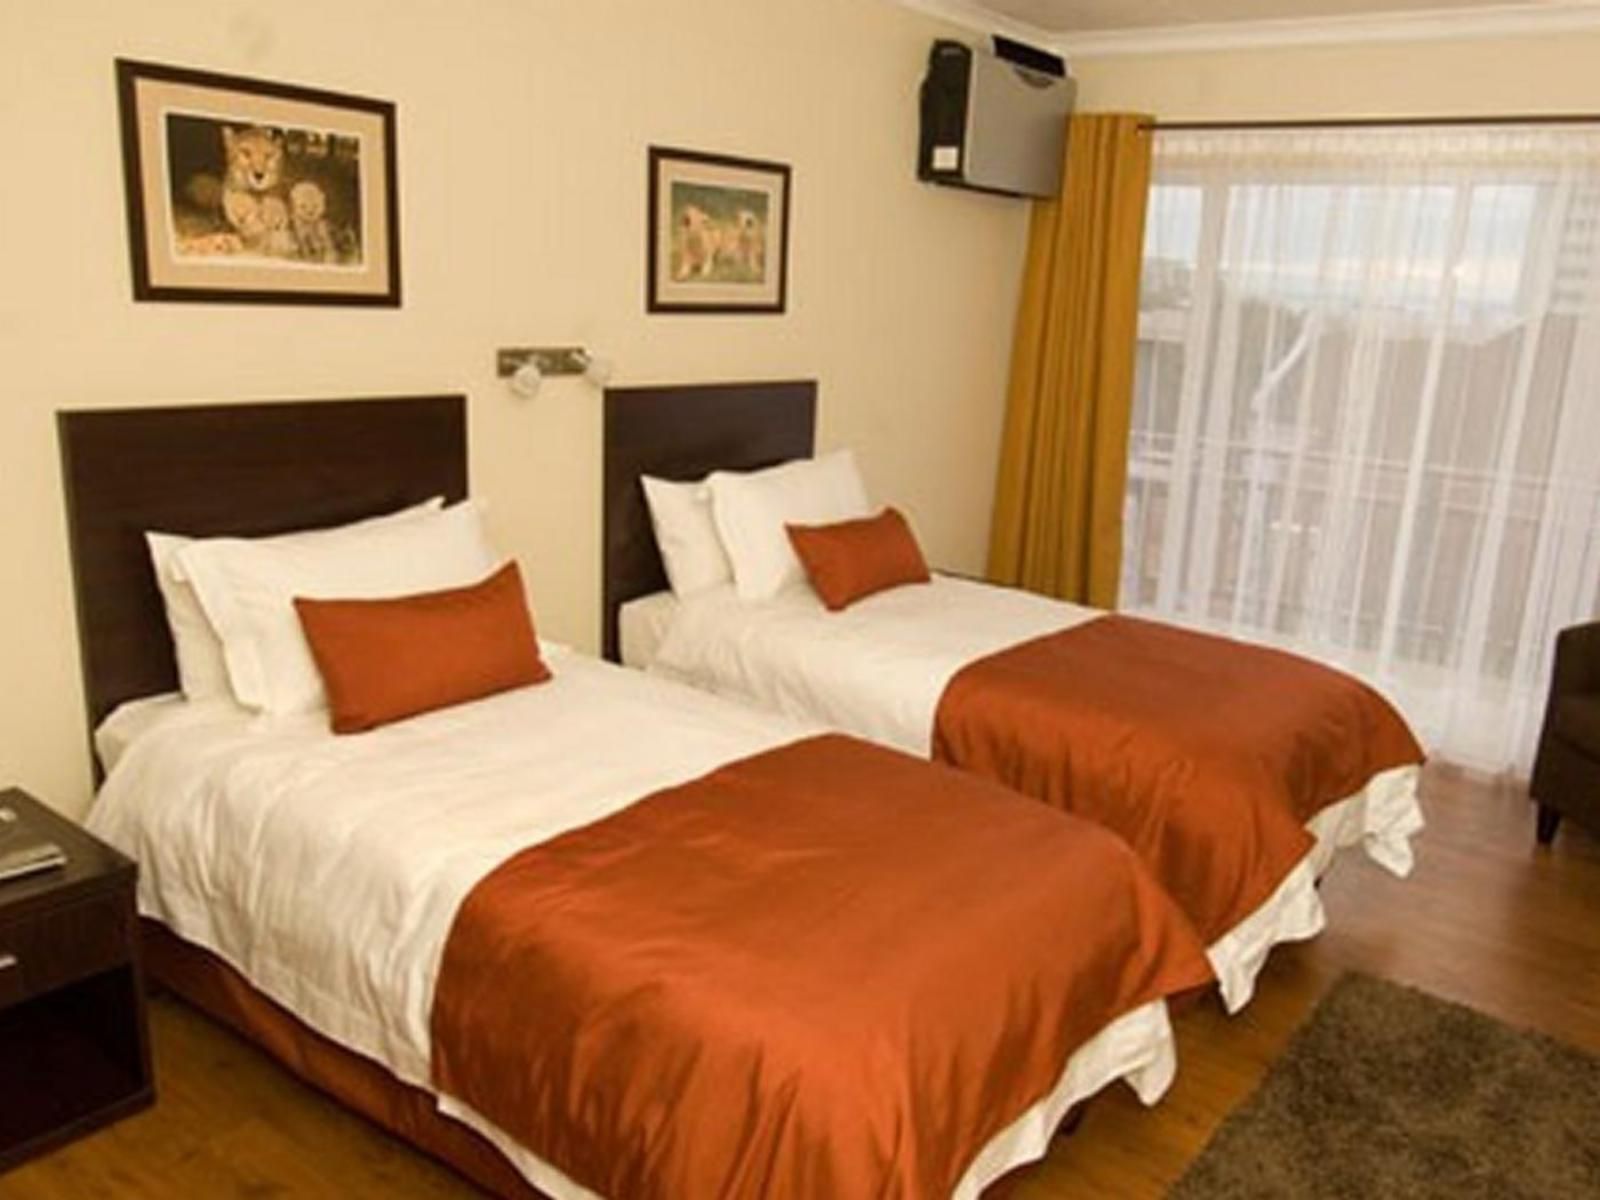 Algoa Bay Bed And Breakfast Humewood Port Elizabeth Eastern Cape South Africa Sepia Tones